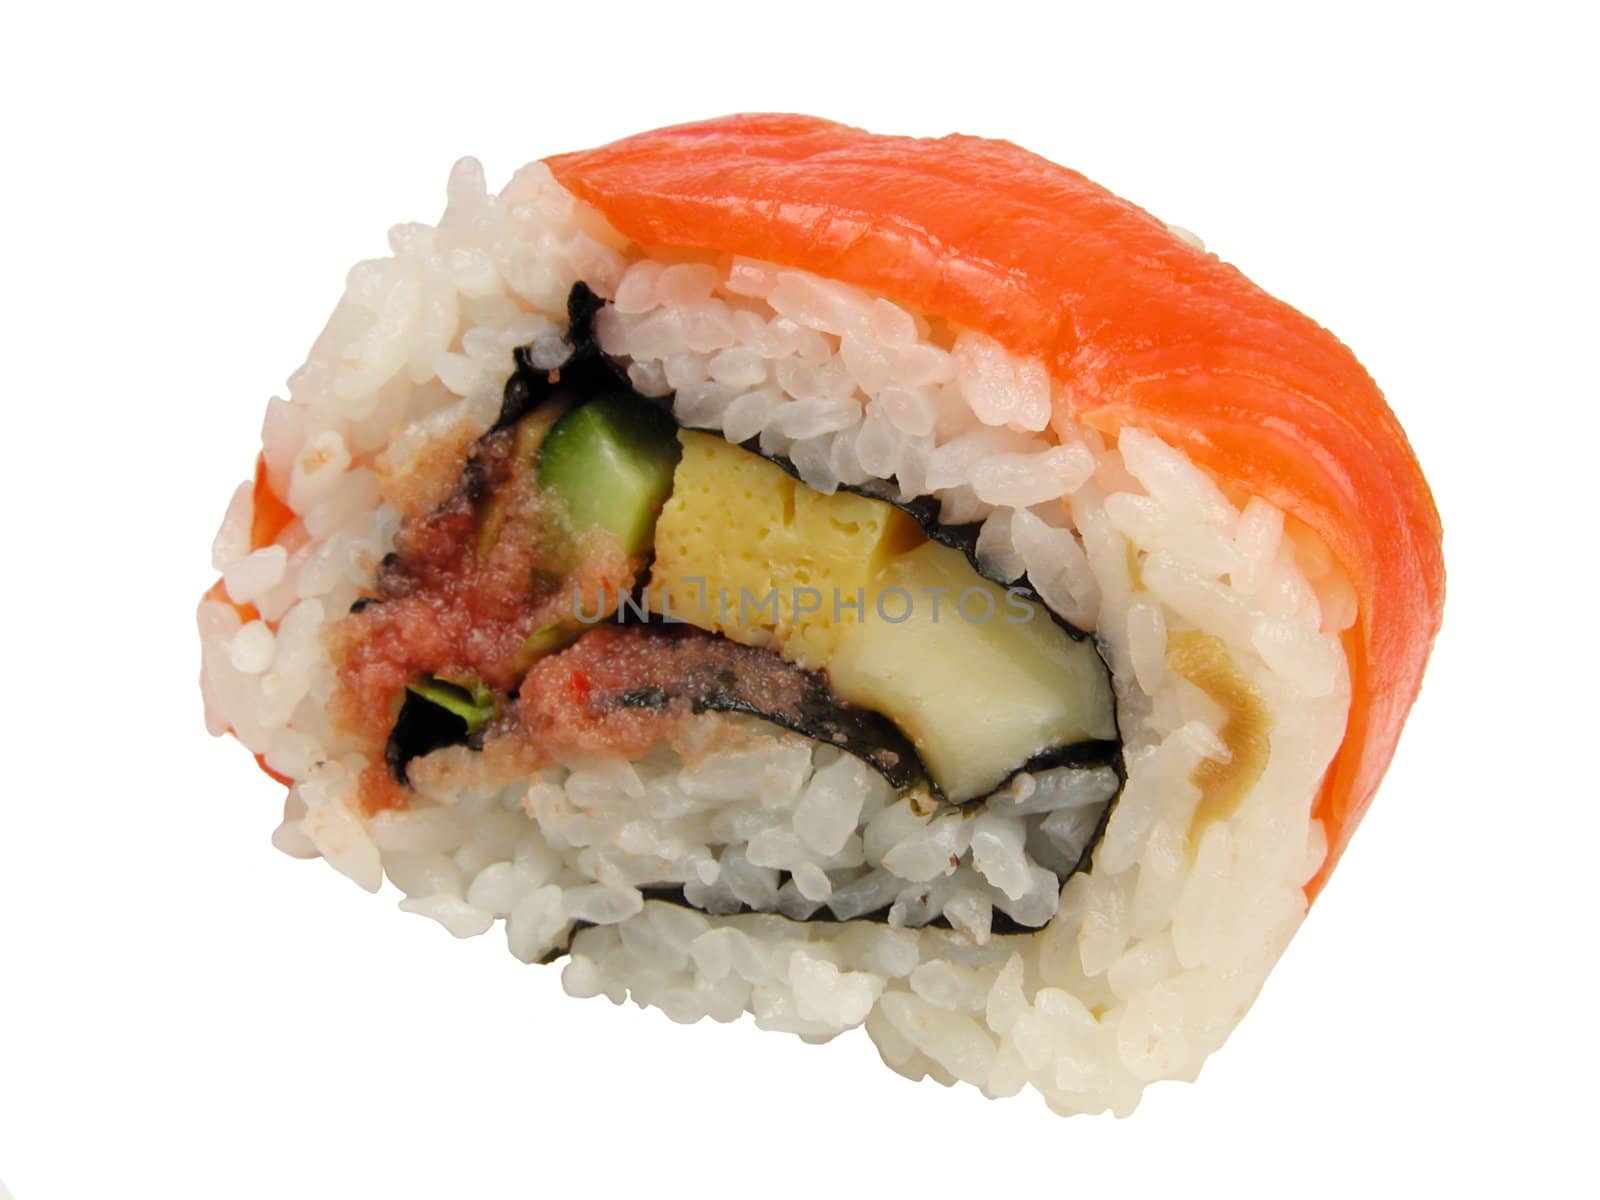 Rainbow roll sushi containing egg row cucumber,avocado,seaweed,rice and raw salmon meat.       